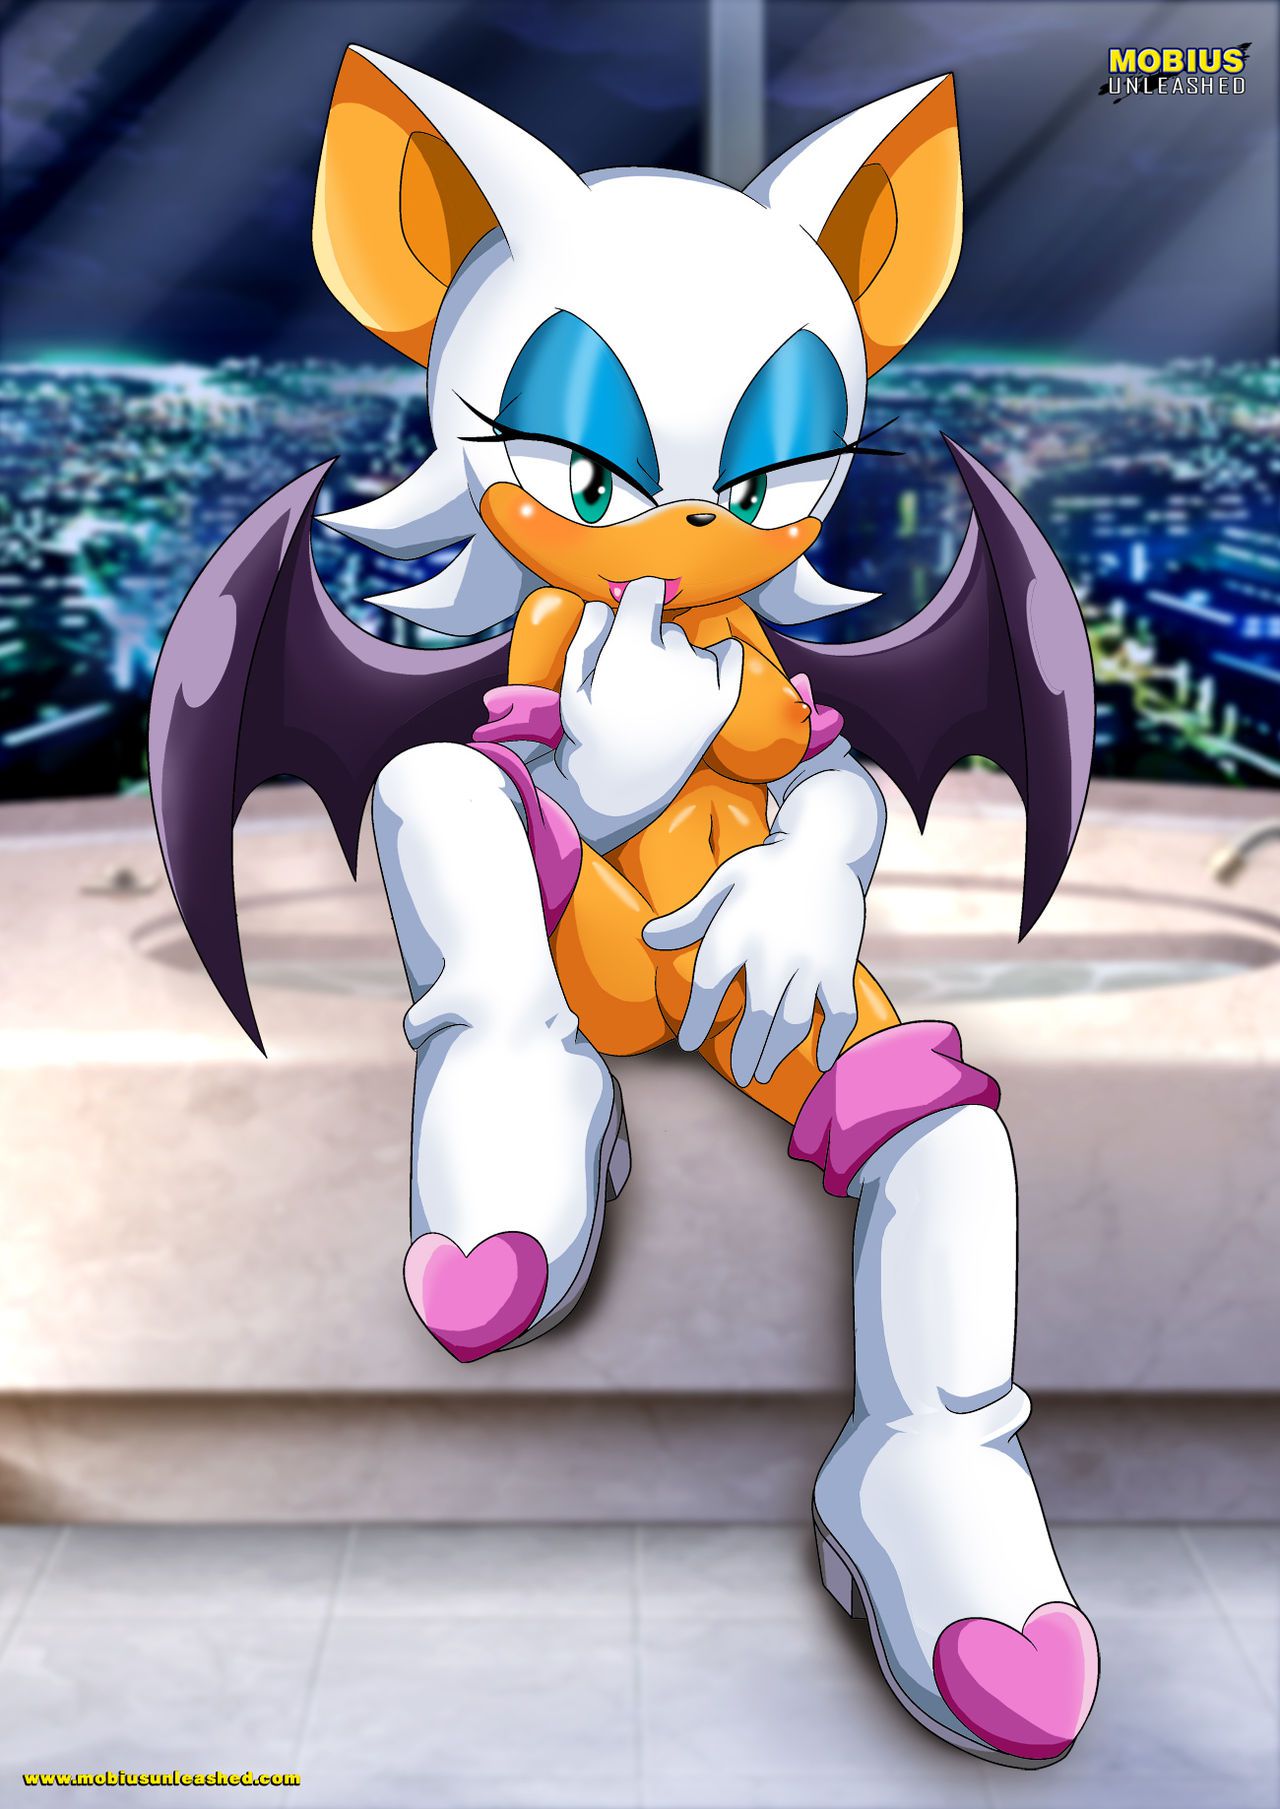 Mobius Unleashed: Rouge the Bat 65